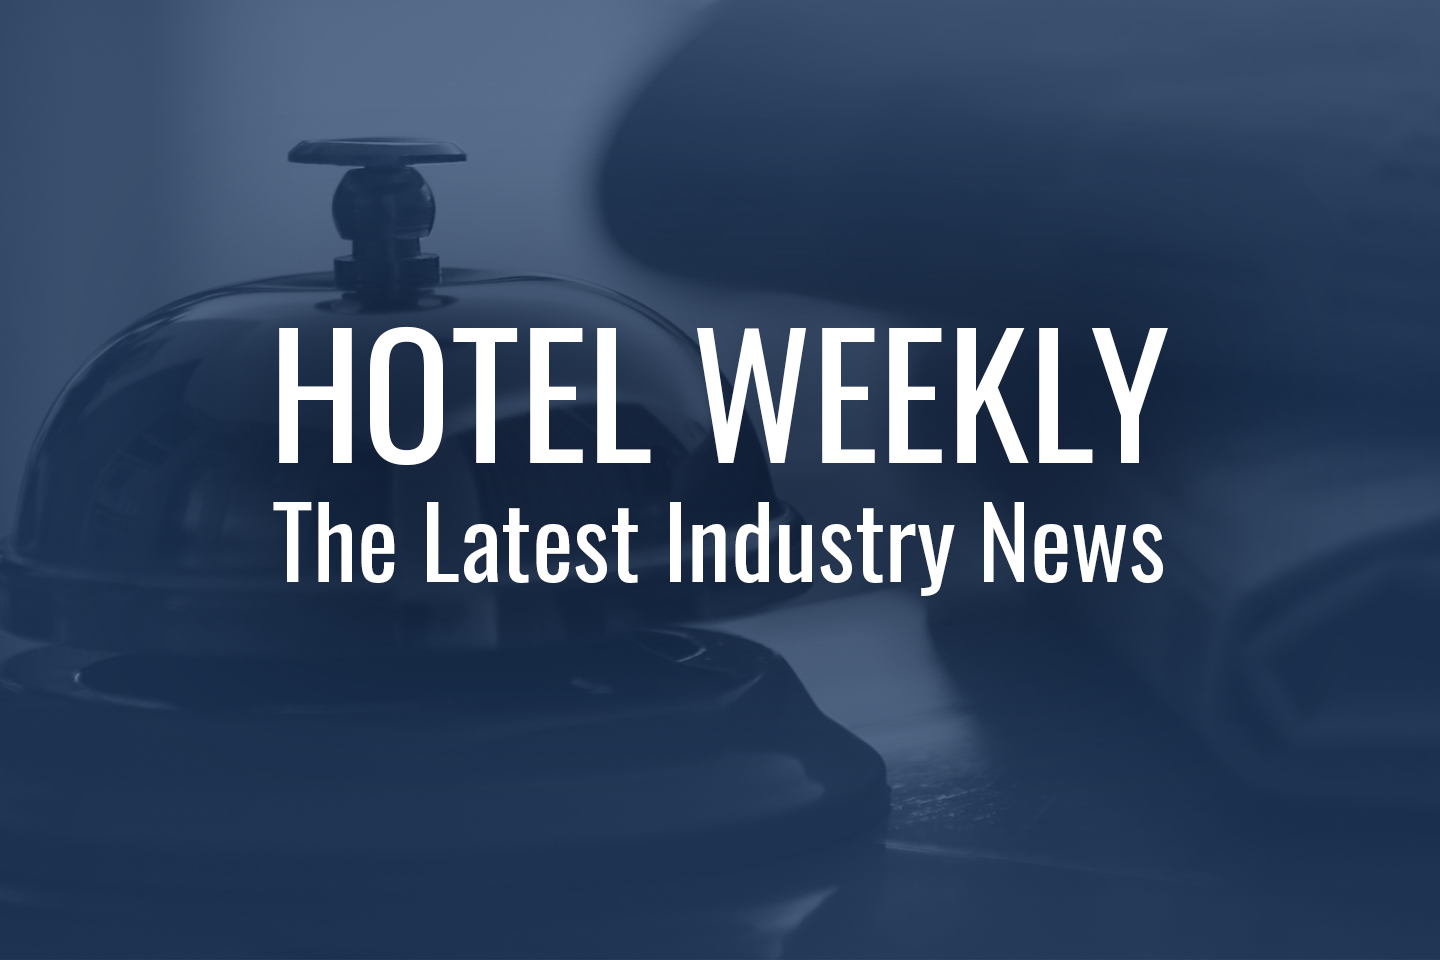 Hotel Weekly Thumb Images